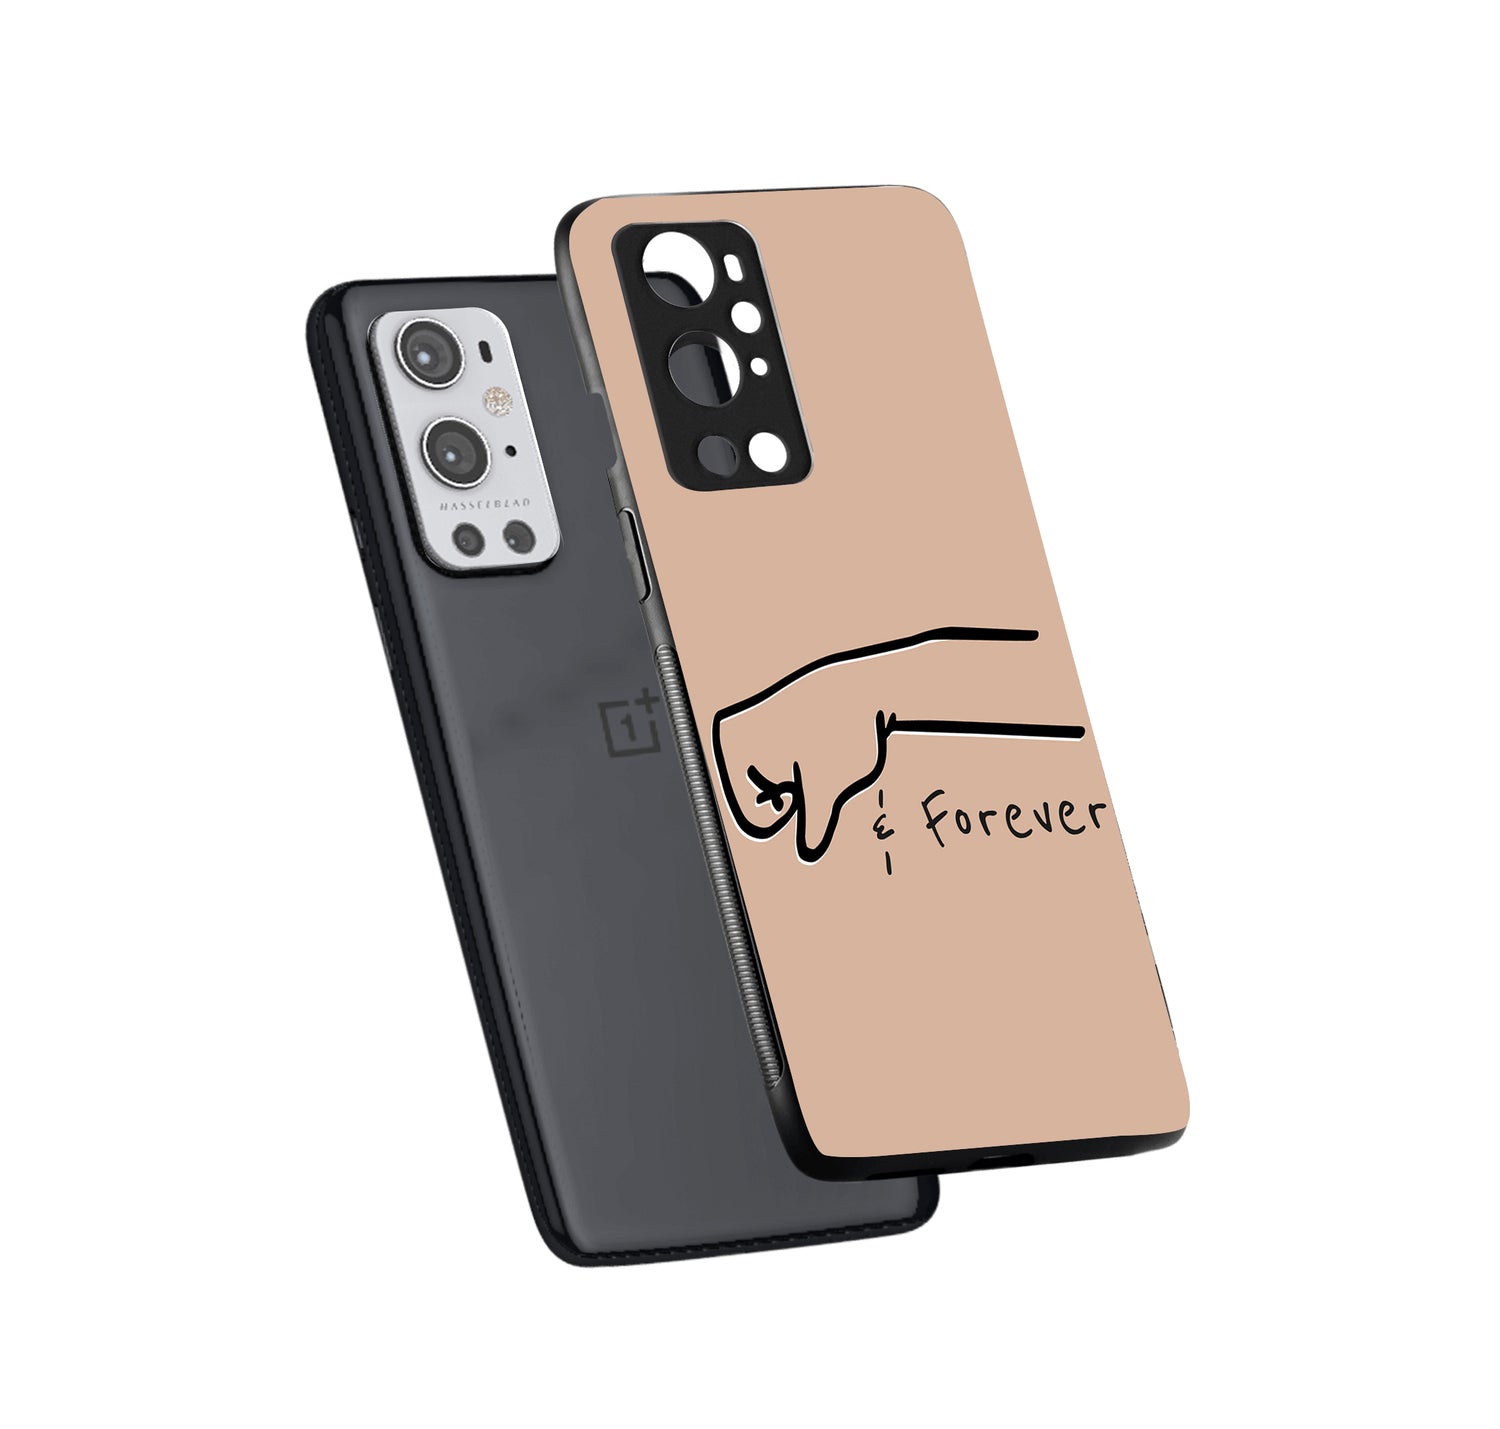 Forever Bff Oneplus 9 Pro Back Case